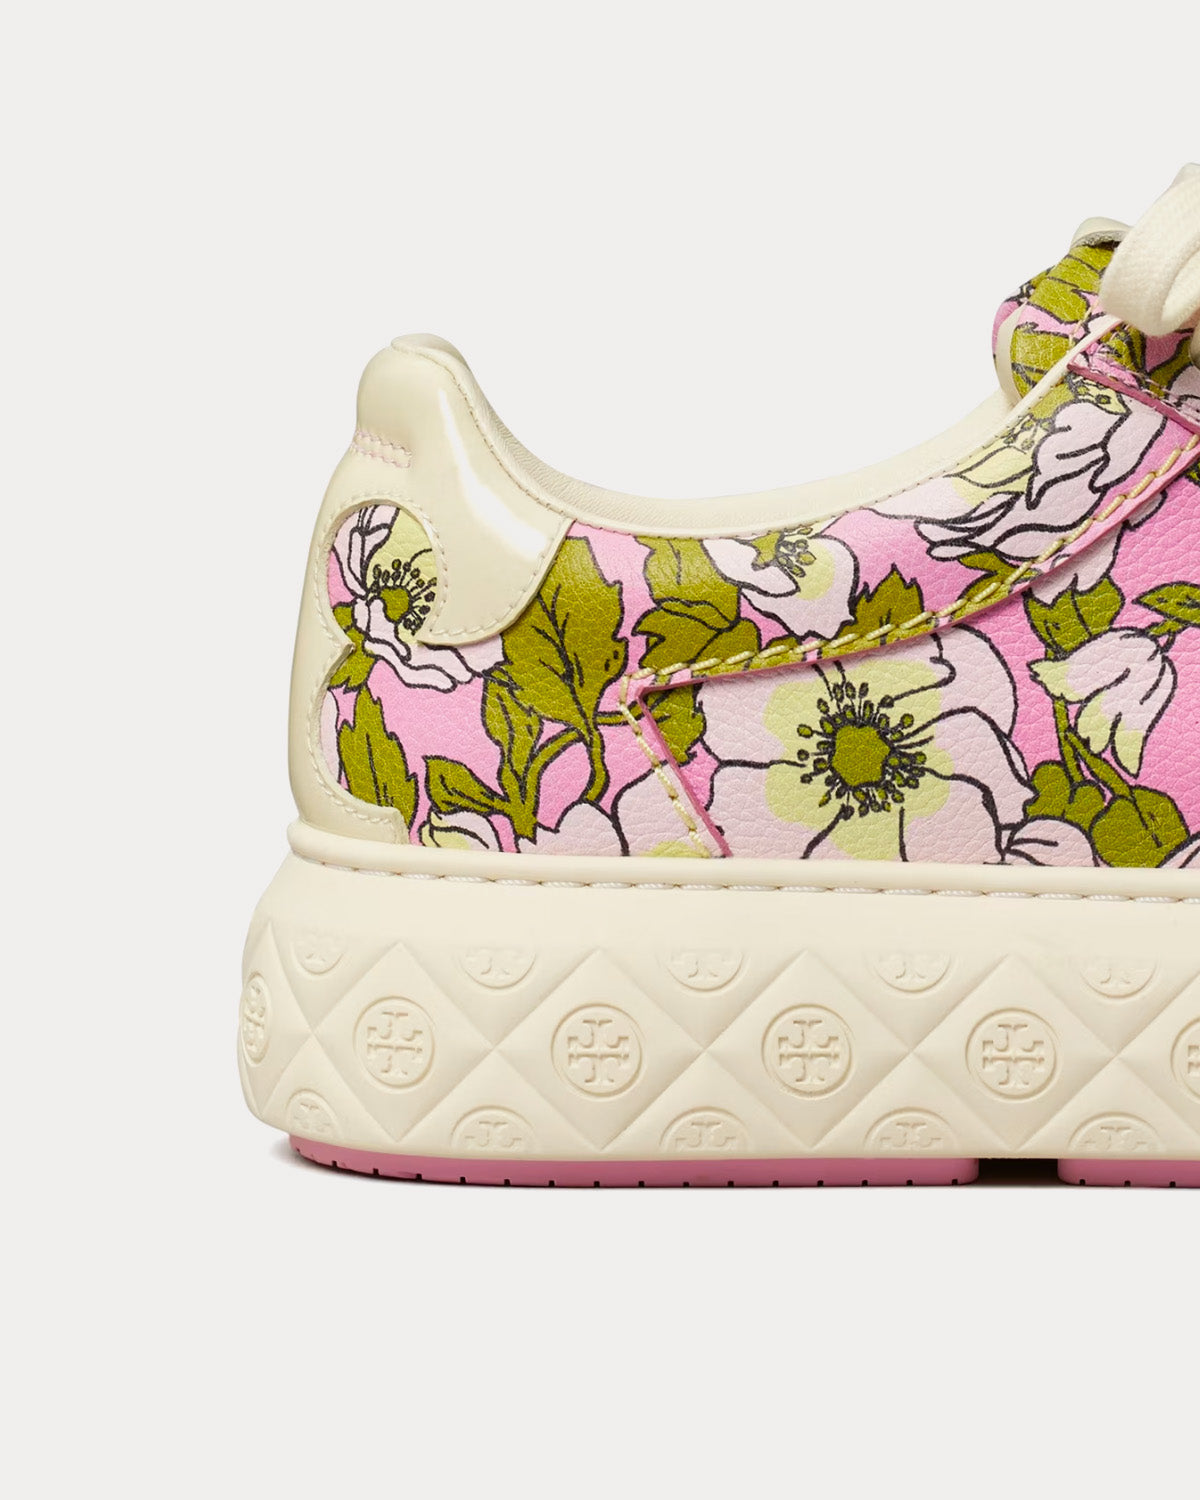 Tory Burch - Ladybug Purple Bold Flowers / Oyster Low Top Sneakers